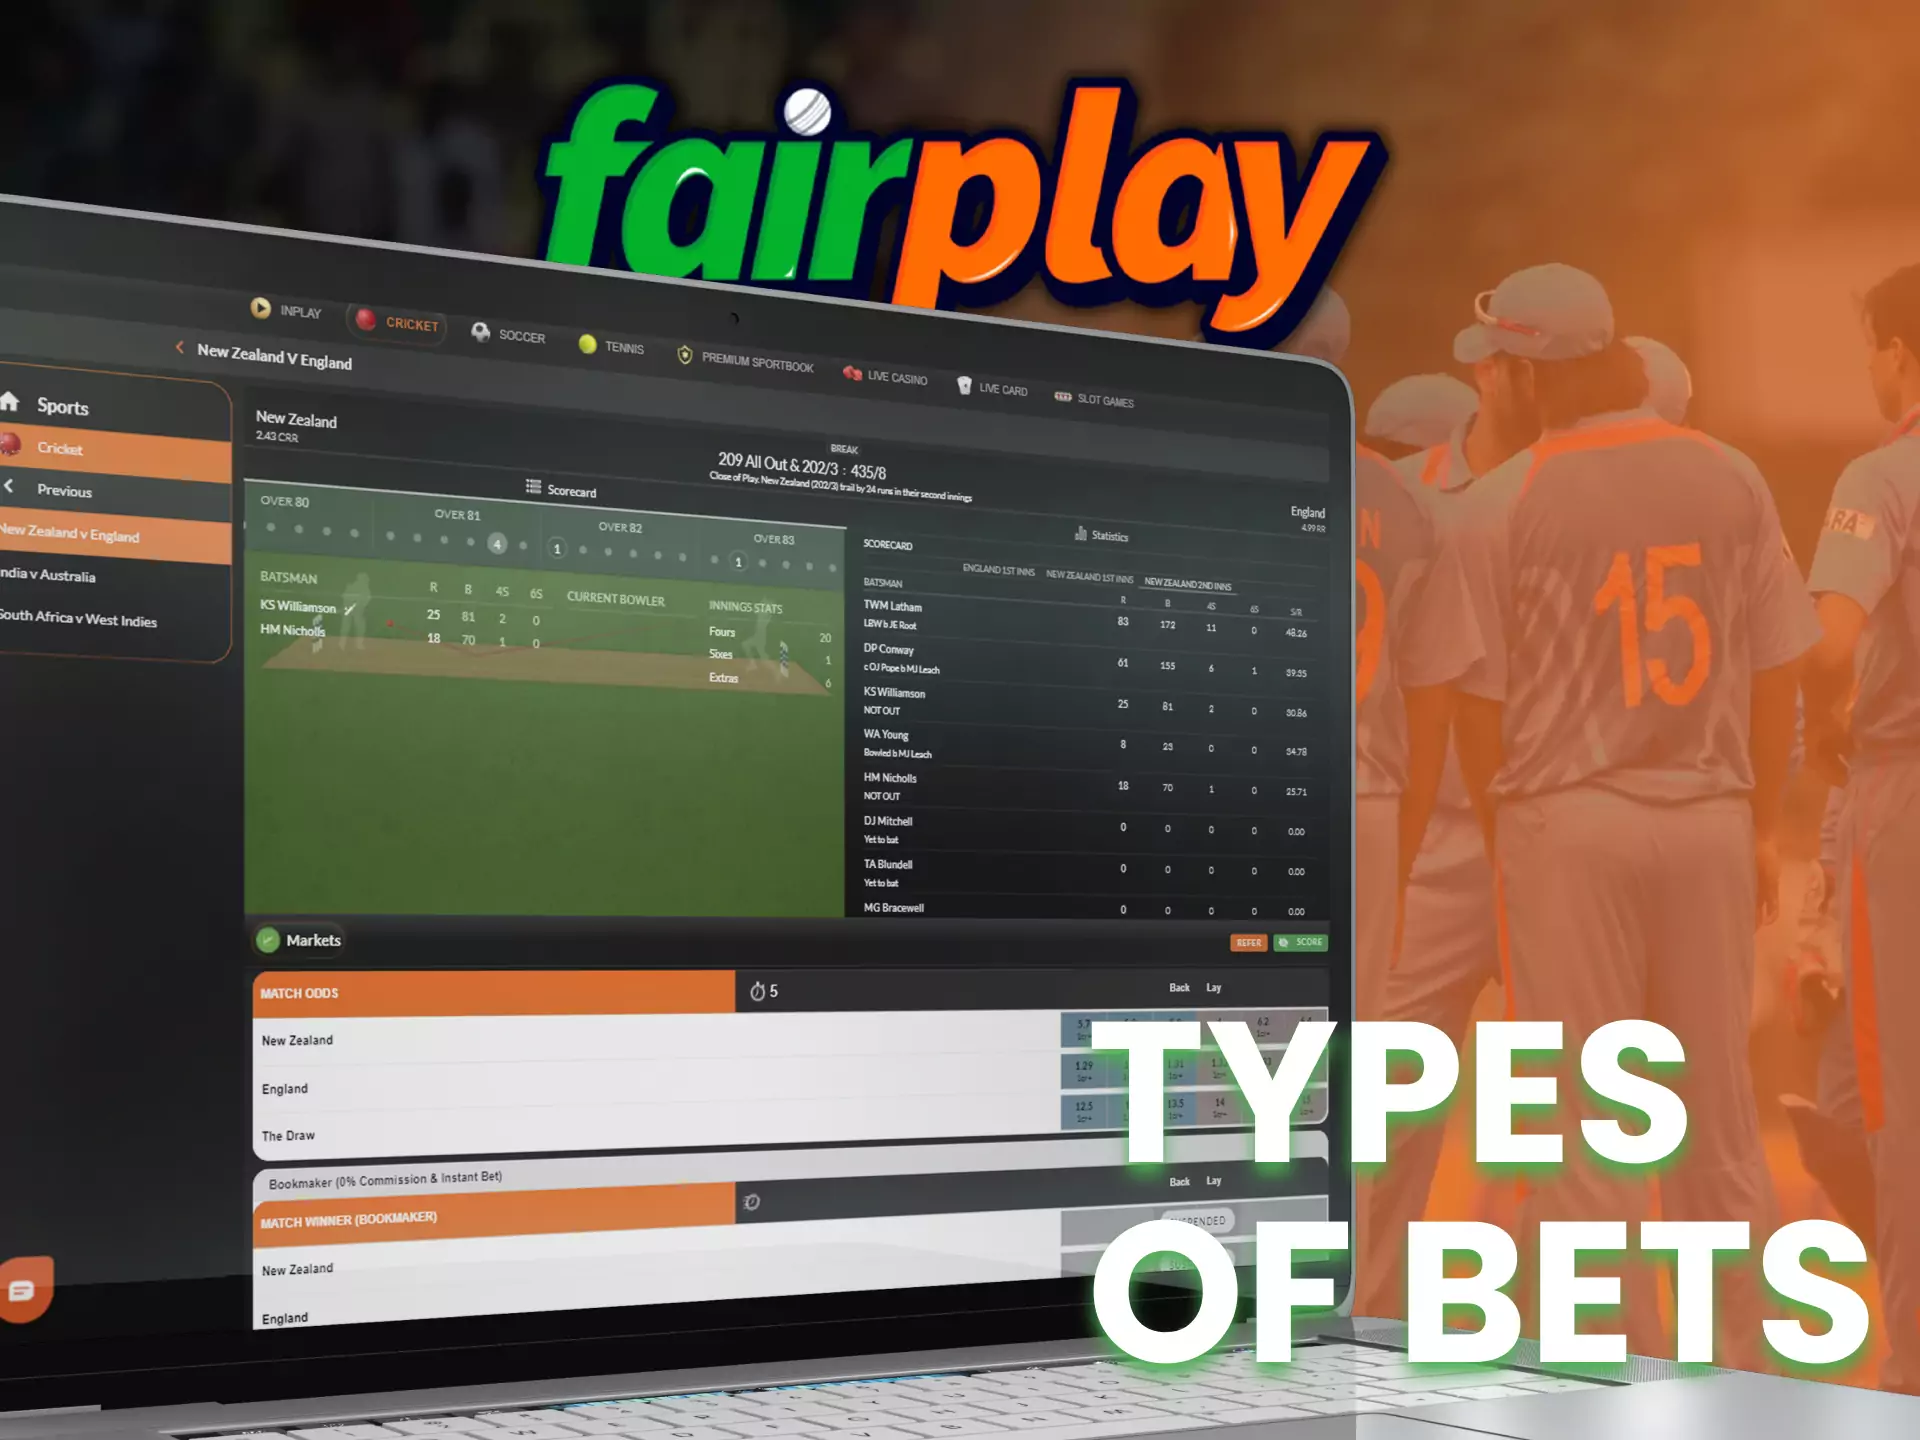 At Fairplay, try different types of betting and find the most comfortable for you.